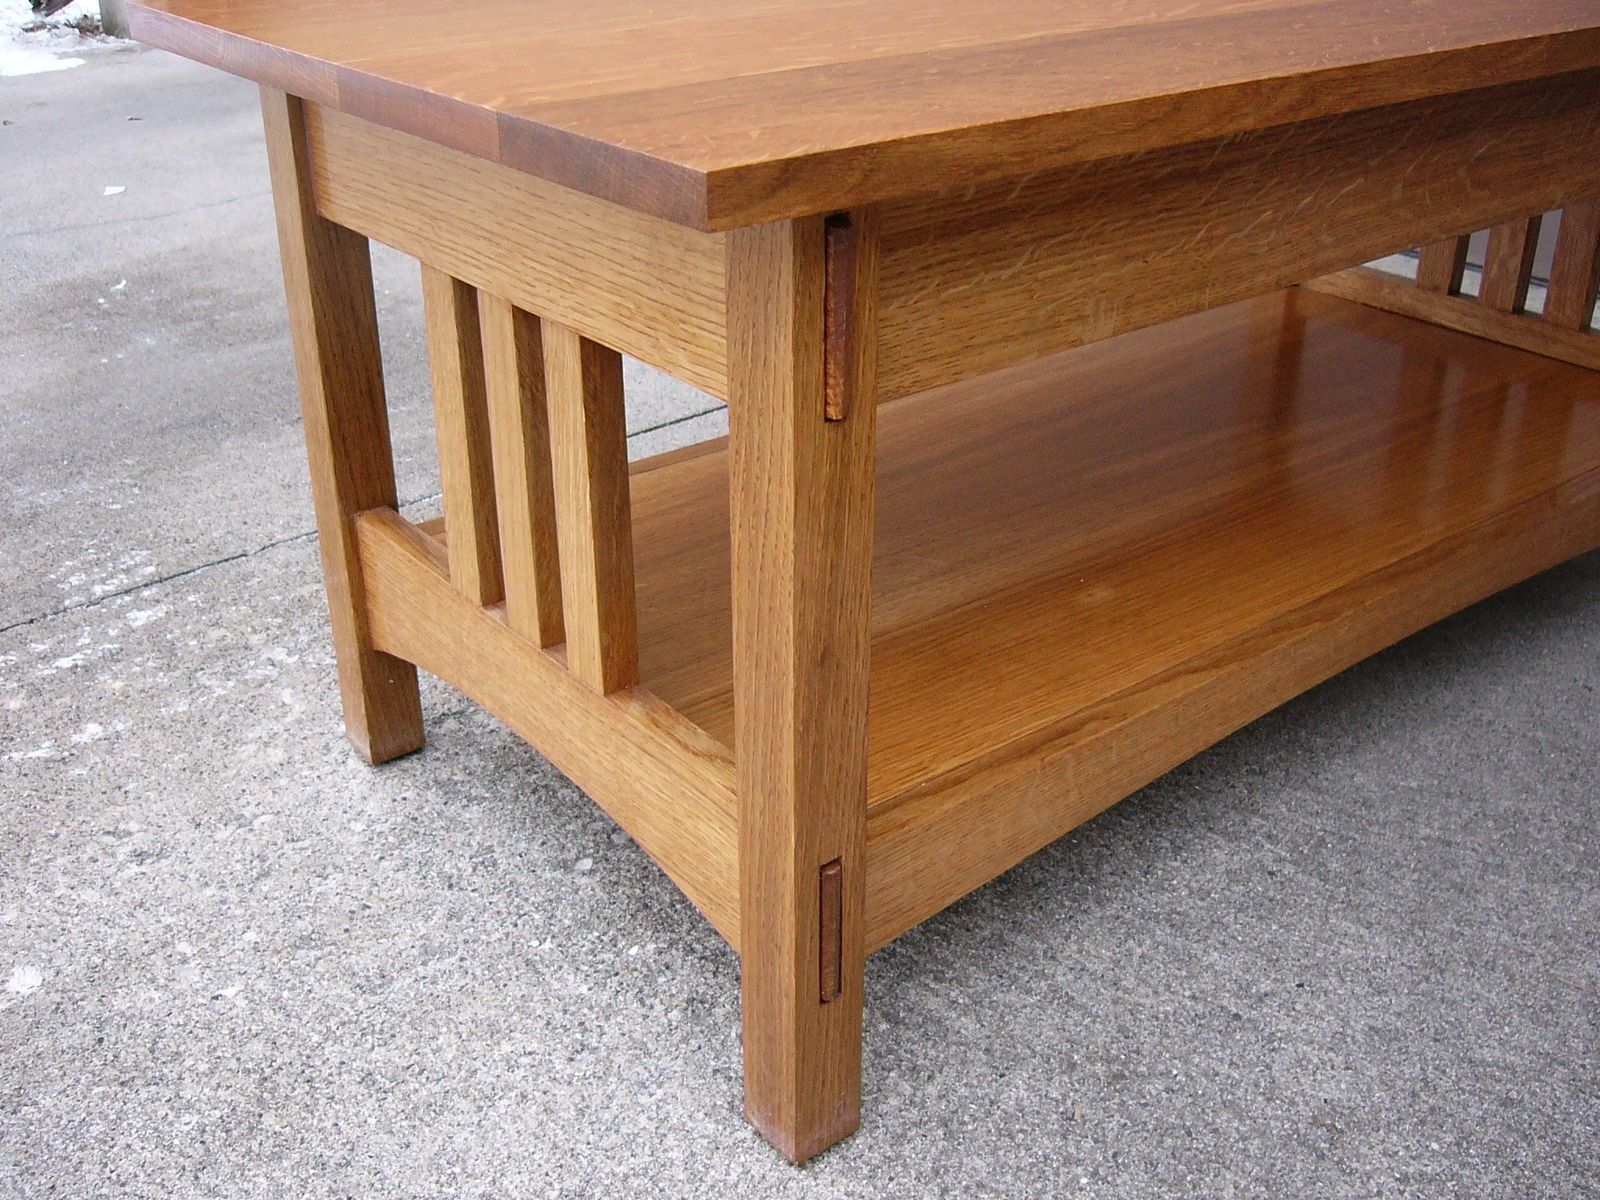 handmade quartersawn oak mission style coffee table and end tables dave quality furniture custommade over the nightstand target parsons two living room modern outdoor patio stools